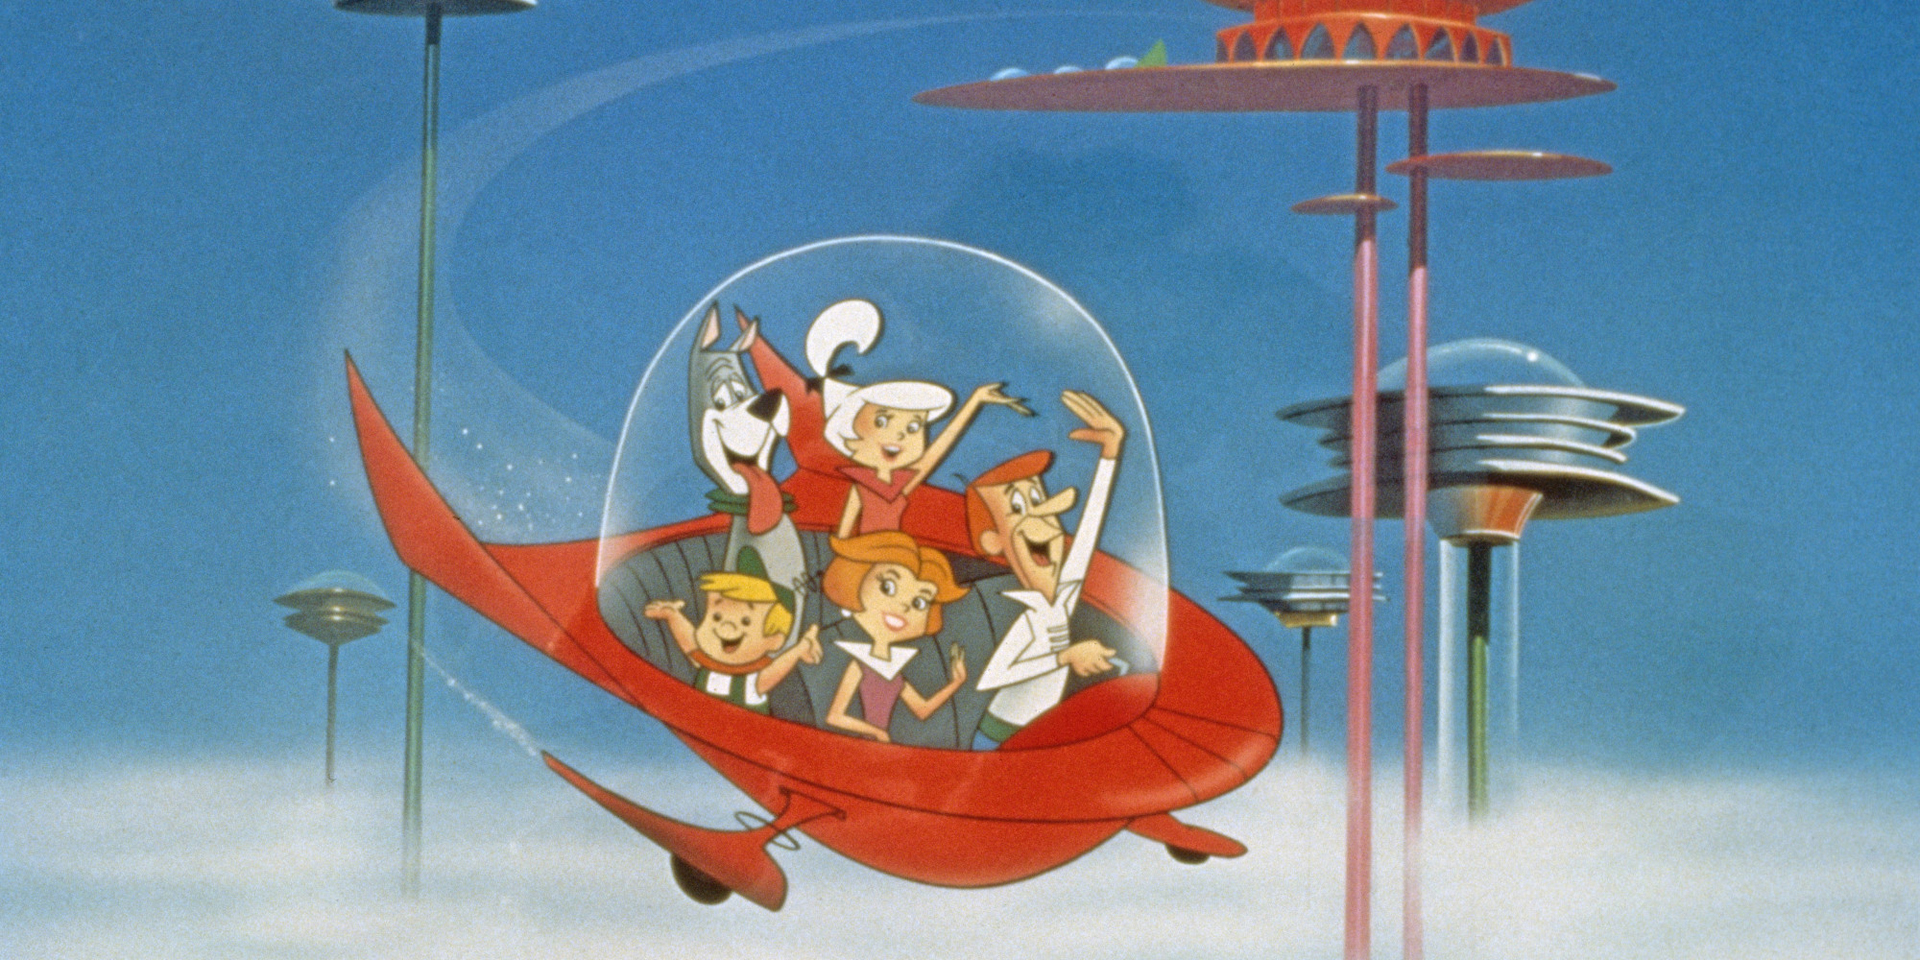 The Jetson family wave as they fly past buildings in space in their spaceship in a still from the animated television series, 'The Jetsons,' circa 1962. (Photo by Warner Bros./Courtesy of Getty Images)